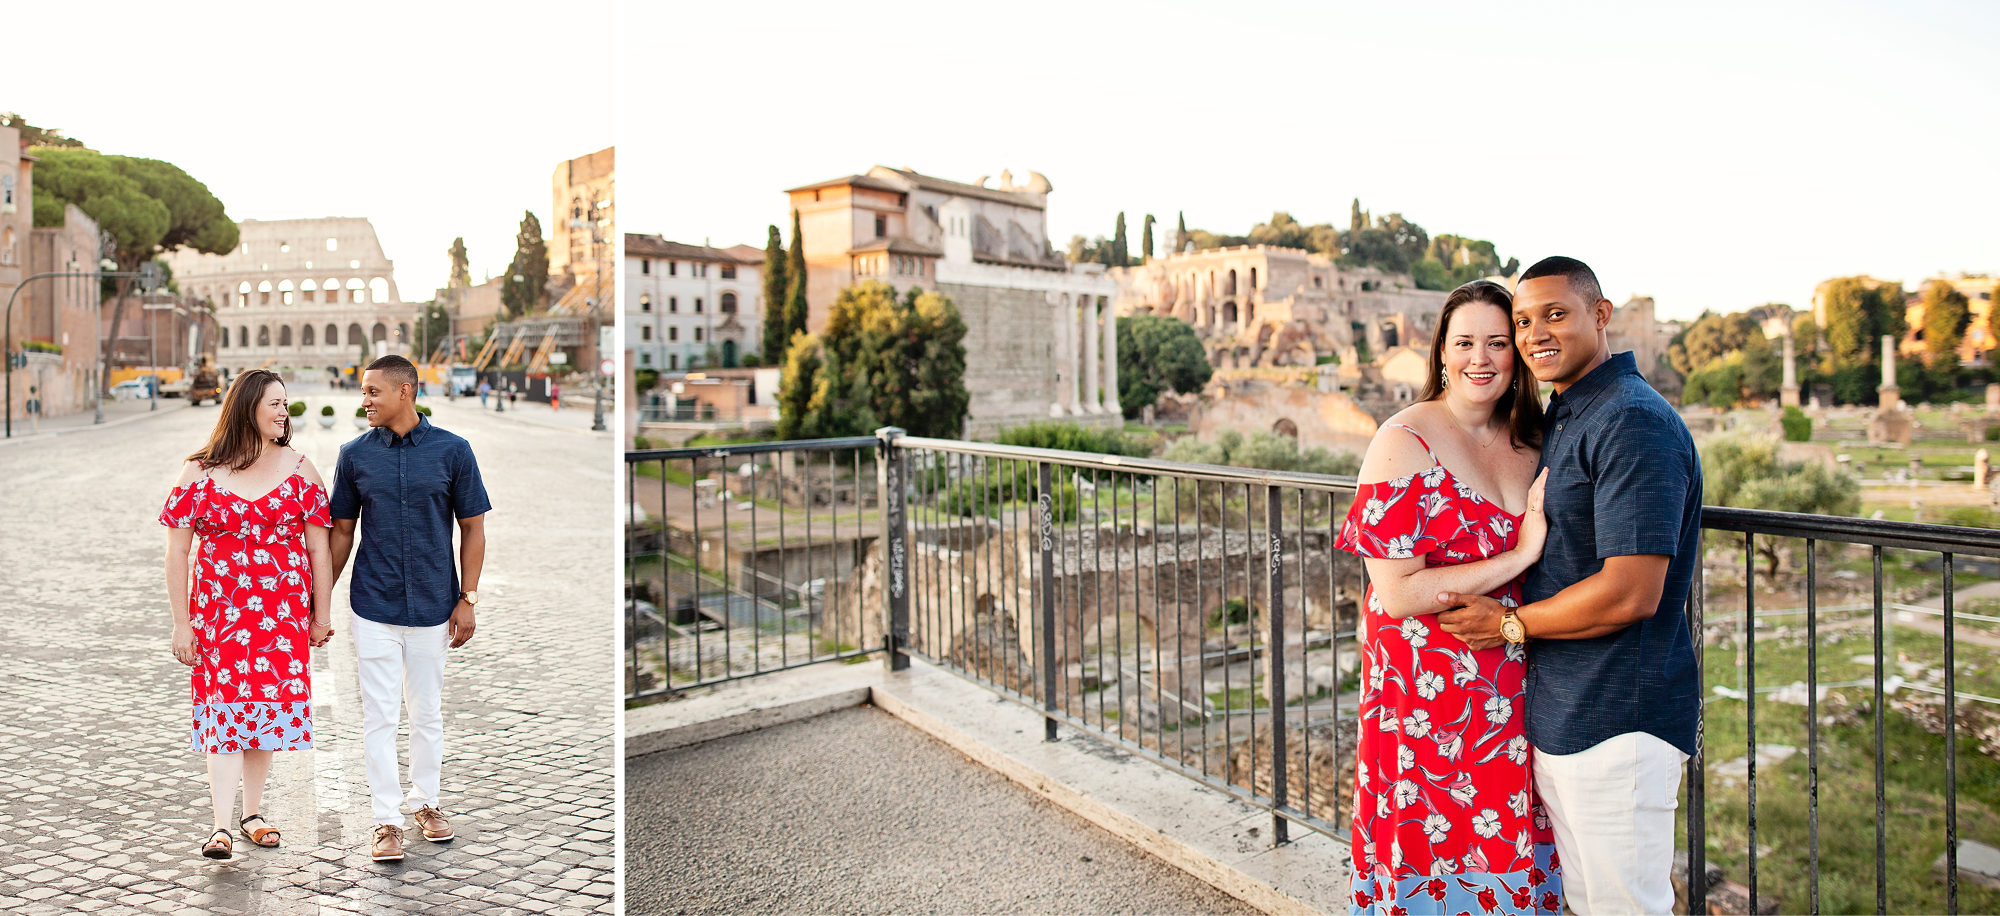 Honeymoon, vacation, family, engagement, maternity, wedding, love story individual and solo photoshoots in Rome, Italy by photographer Tricia Anne Photography | Rome Photographer, vacation, tripadvisor, instagram, fun, married, bride, groom, love, story, photography, session, photoshoot, wedding photographer, mywed, vacation photographer, engagement photo, honeymoon photoshoot, rome honeymoon, rome wedding, elopement in Rome, honeymoon photographer rome, Family Photo shoot Rome, Rome Engagement Photography, Rome Engagement Photographer, Colosseum Photo shoot, Colosseum Photography, surprise proposal rome